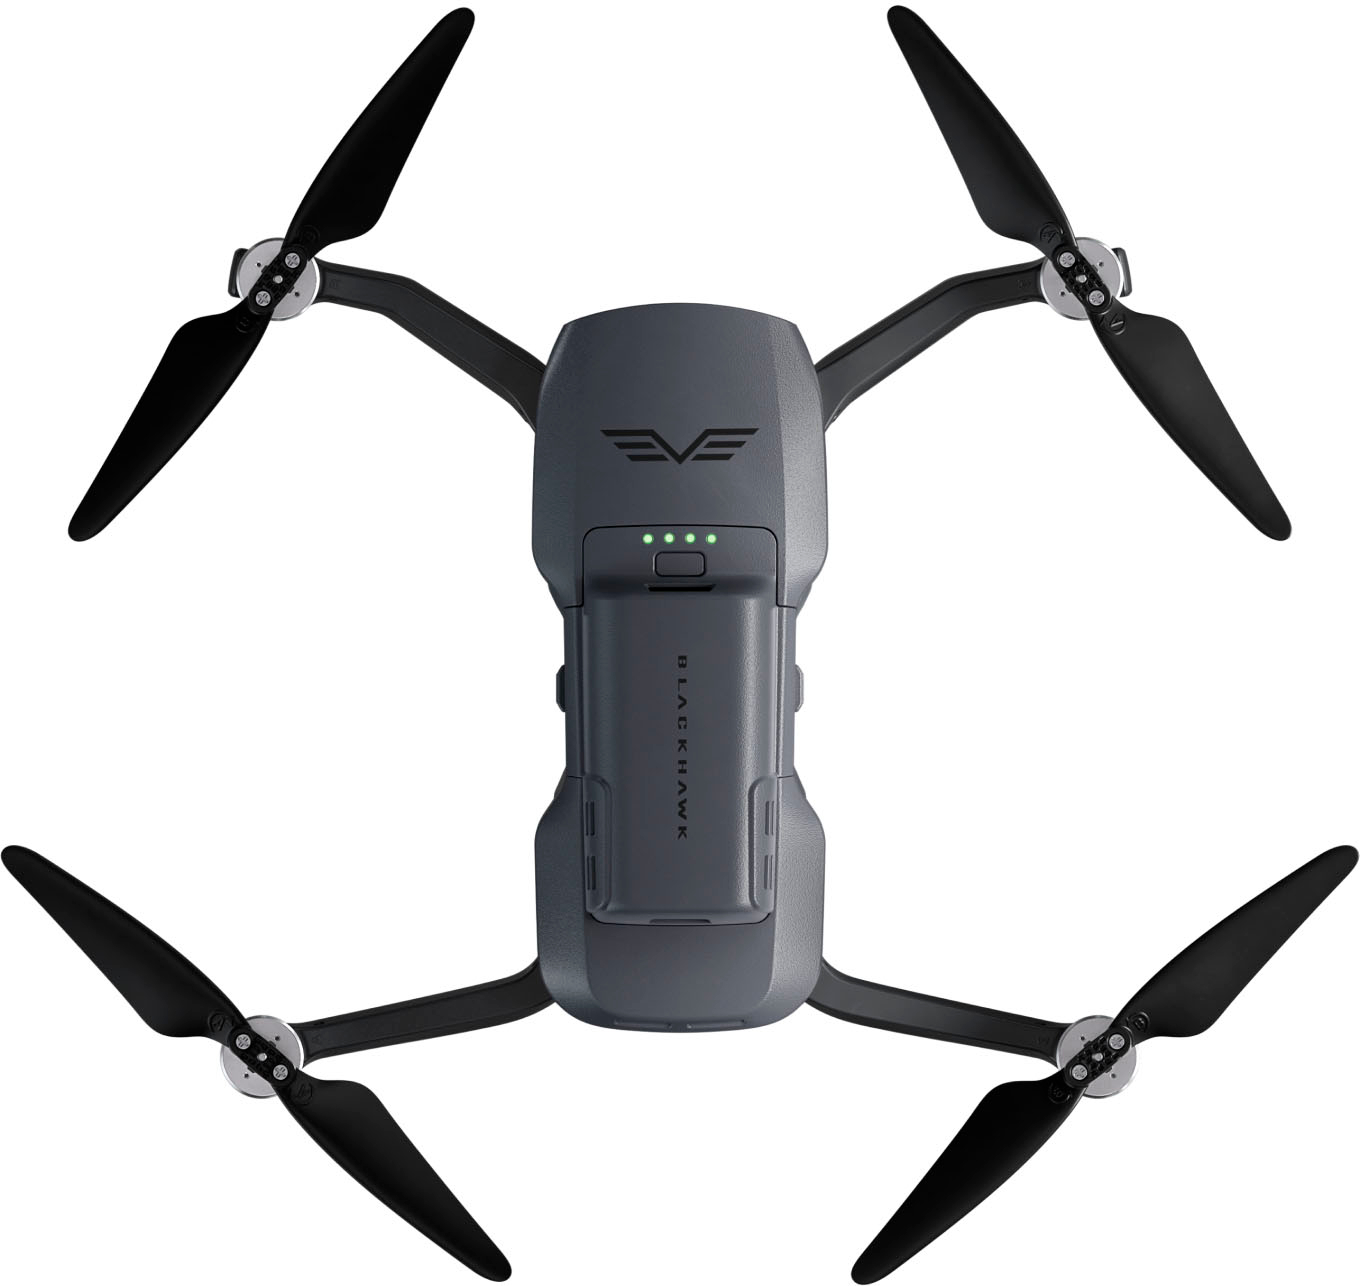 Angle View: Geek Squad Certified Refurbished DJI Mini SE Quadcopter with Remote Controller